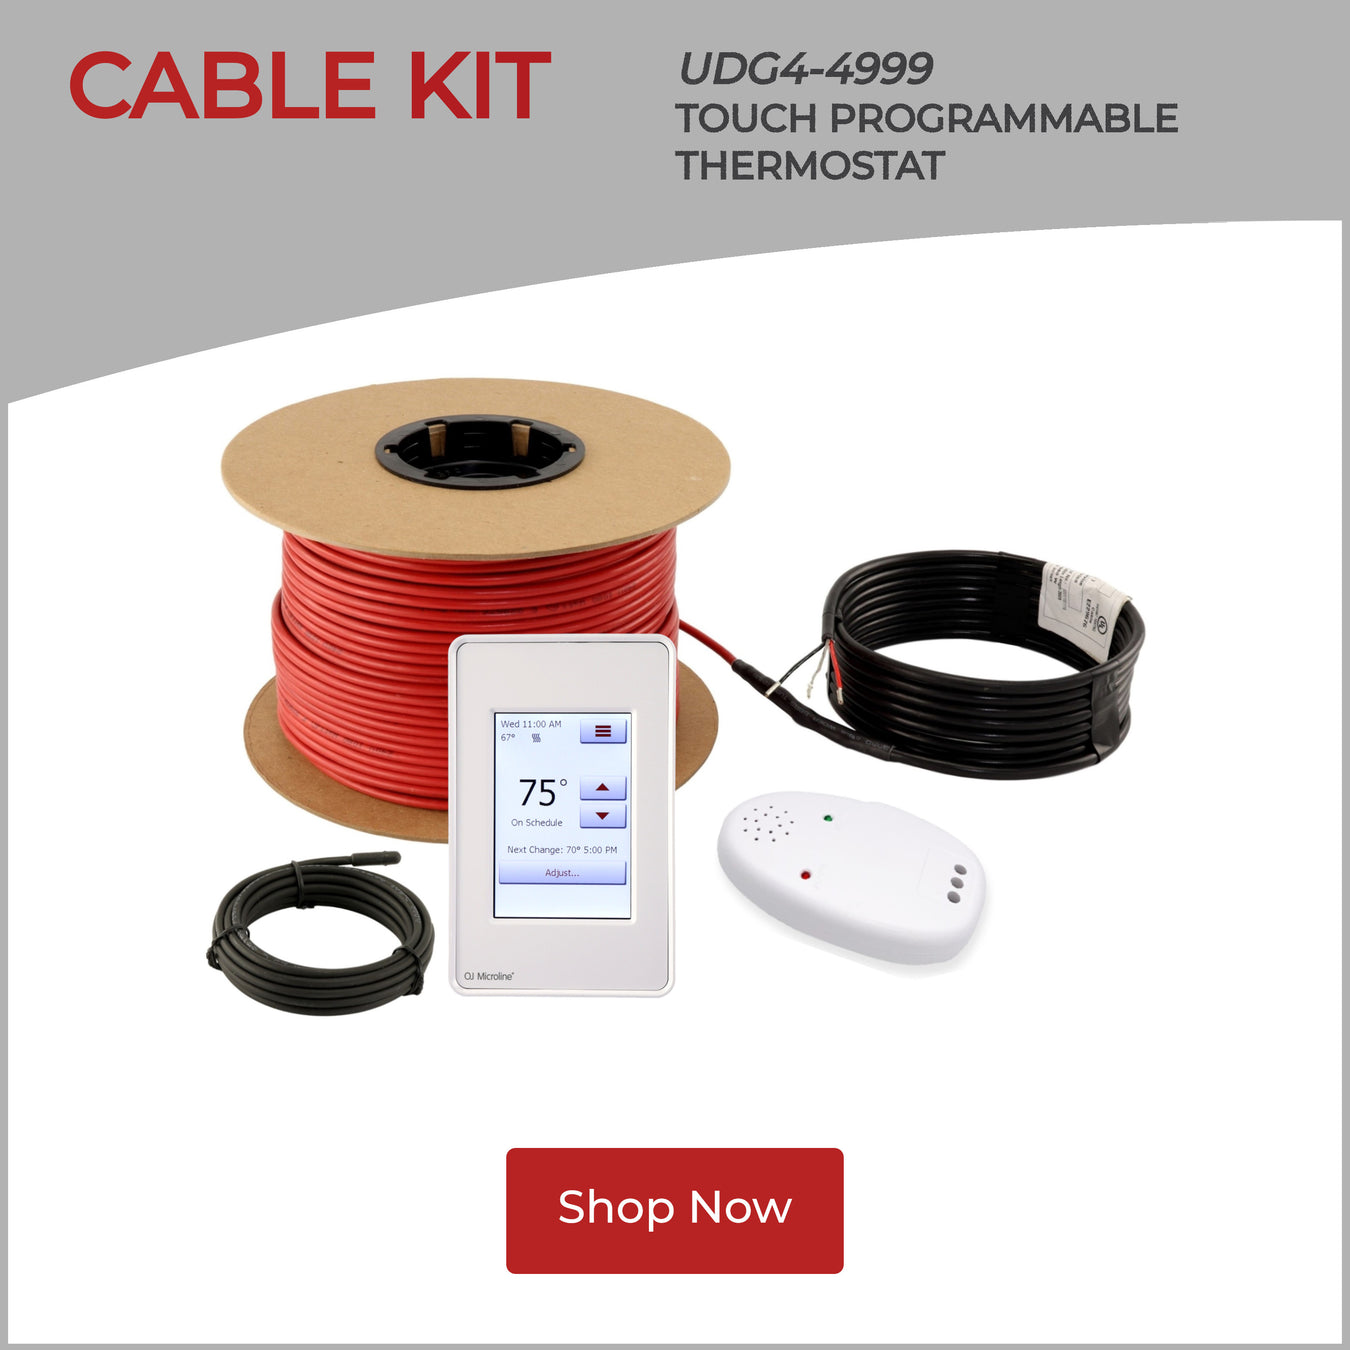 Overview_-_Cable_Kit_with_UDG4